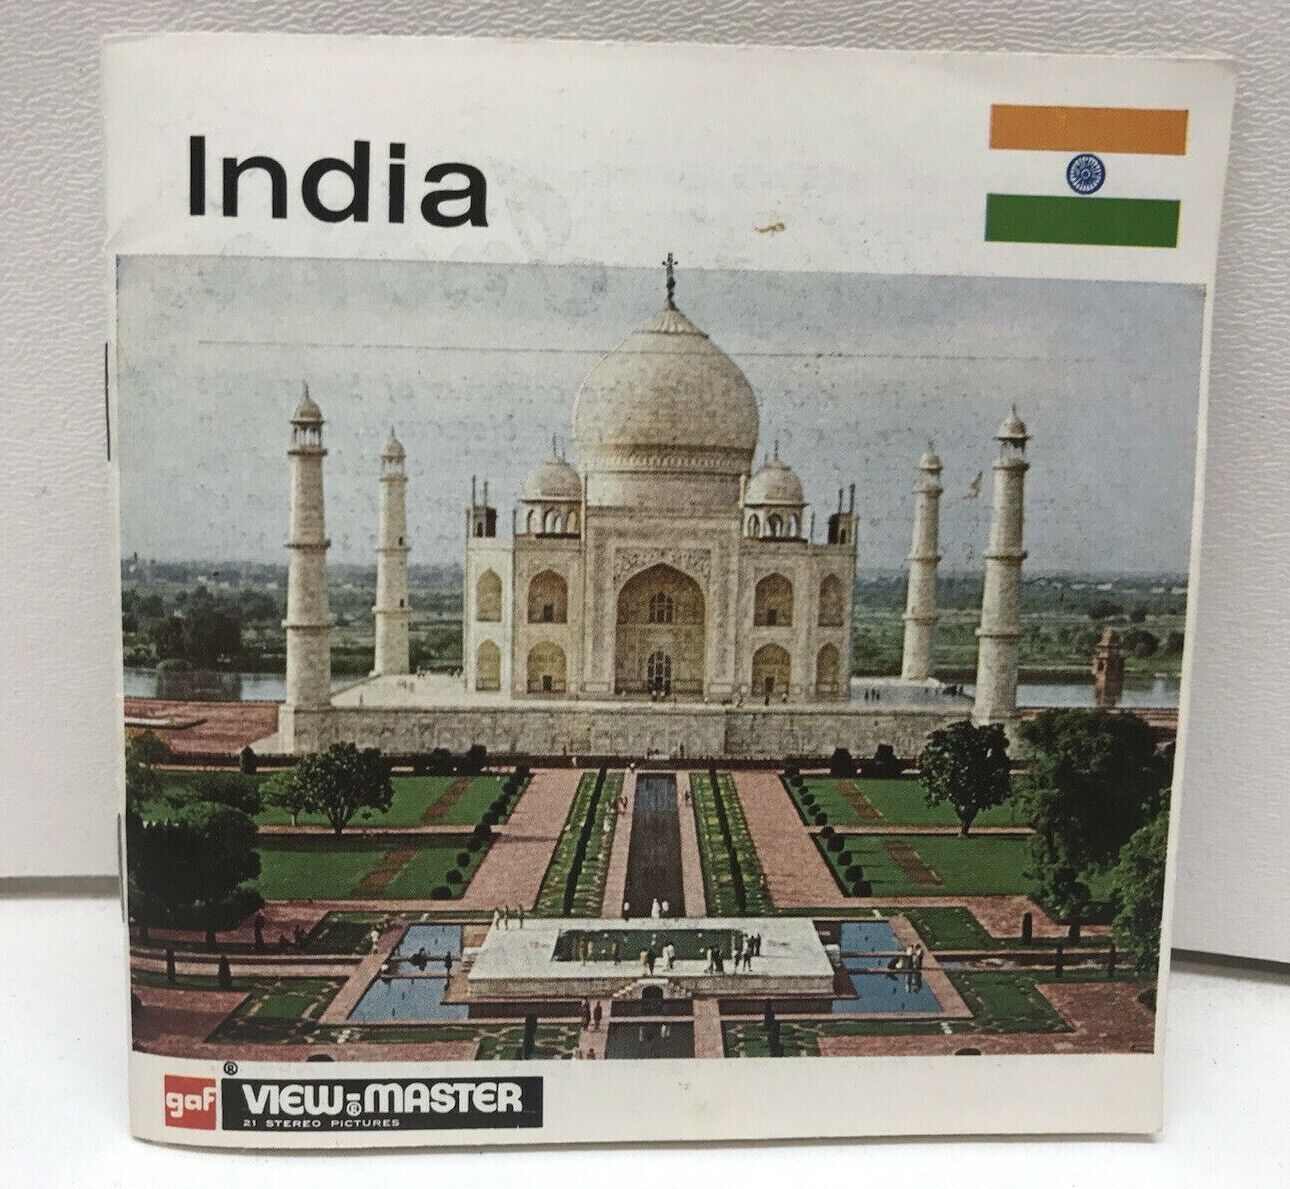 India GAF View-Master Nations of the World Series 21 Stereo Picture Set C 880-E